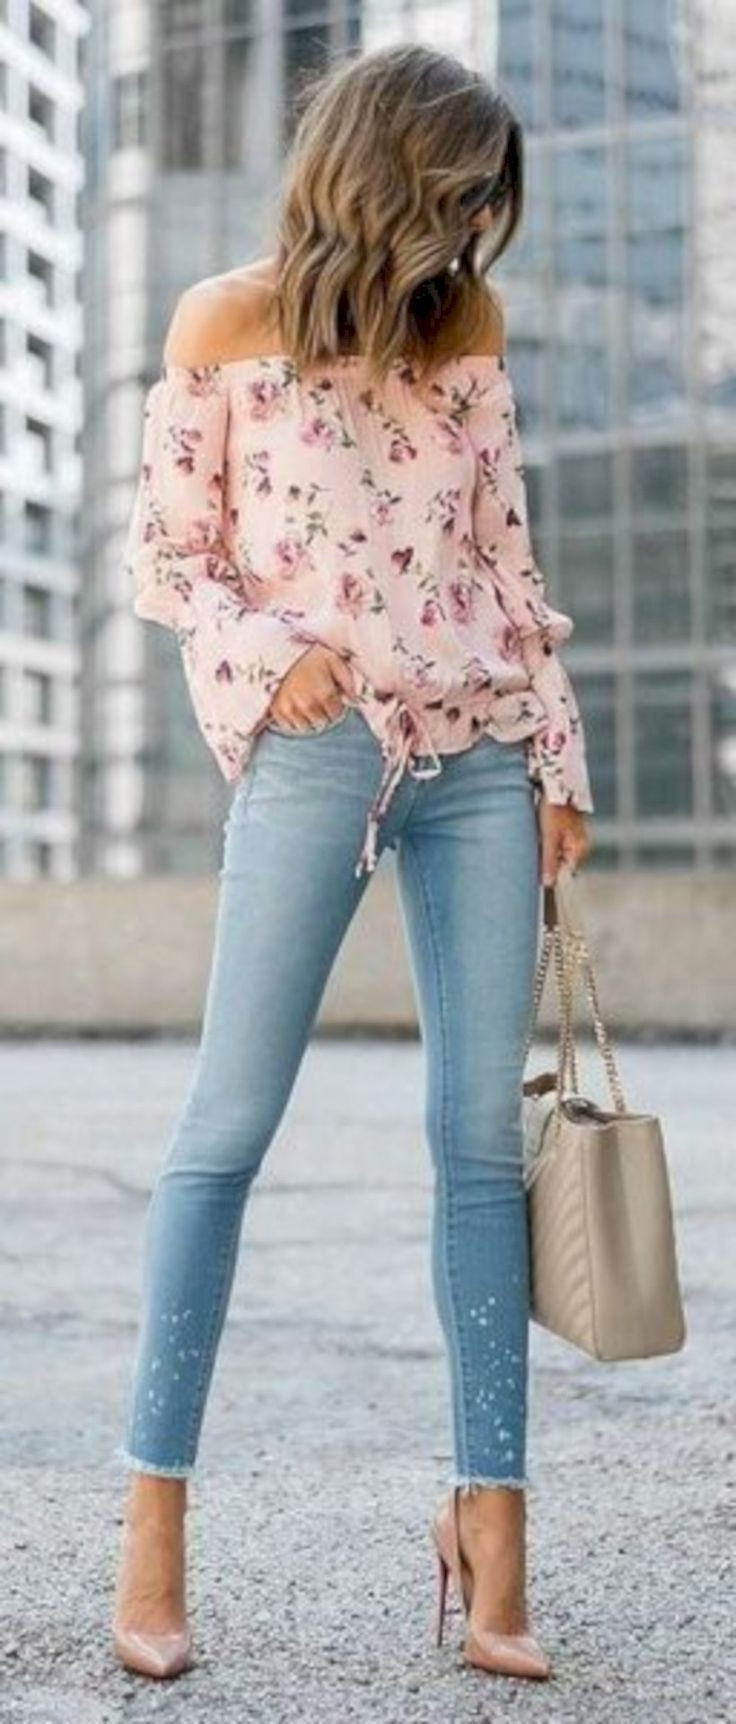 Easter Outfit Ideas For Women
 34 Casual Chic Outfit Ideas for Summer